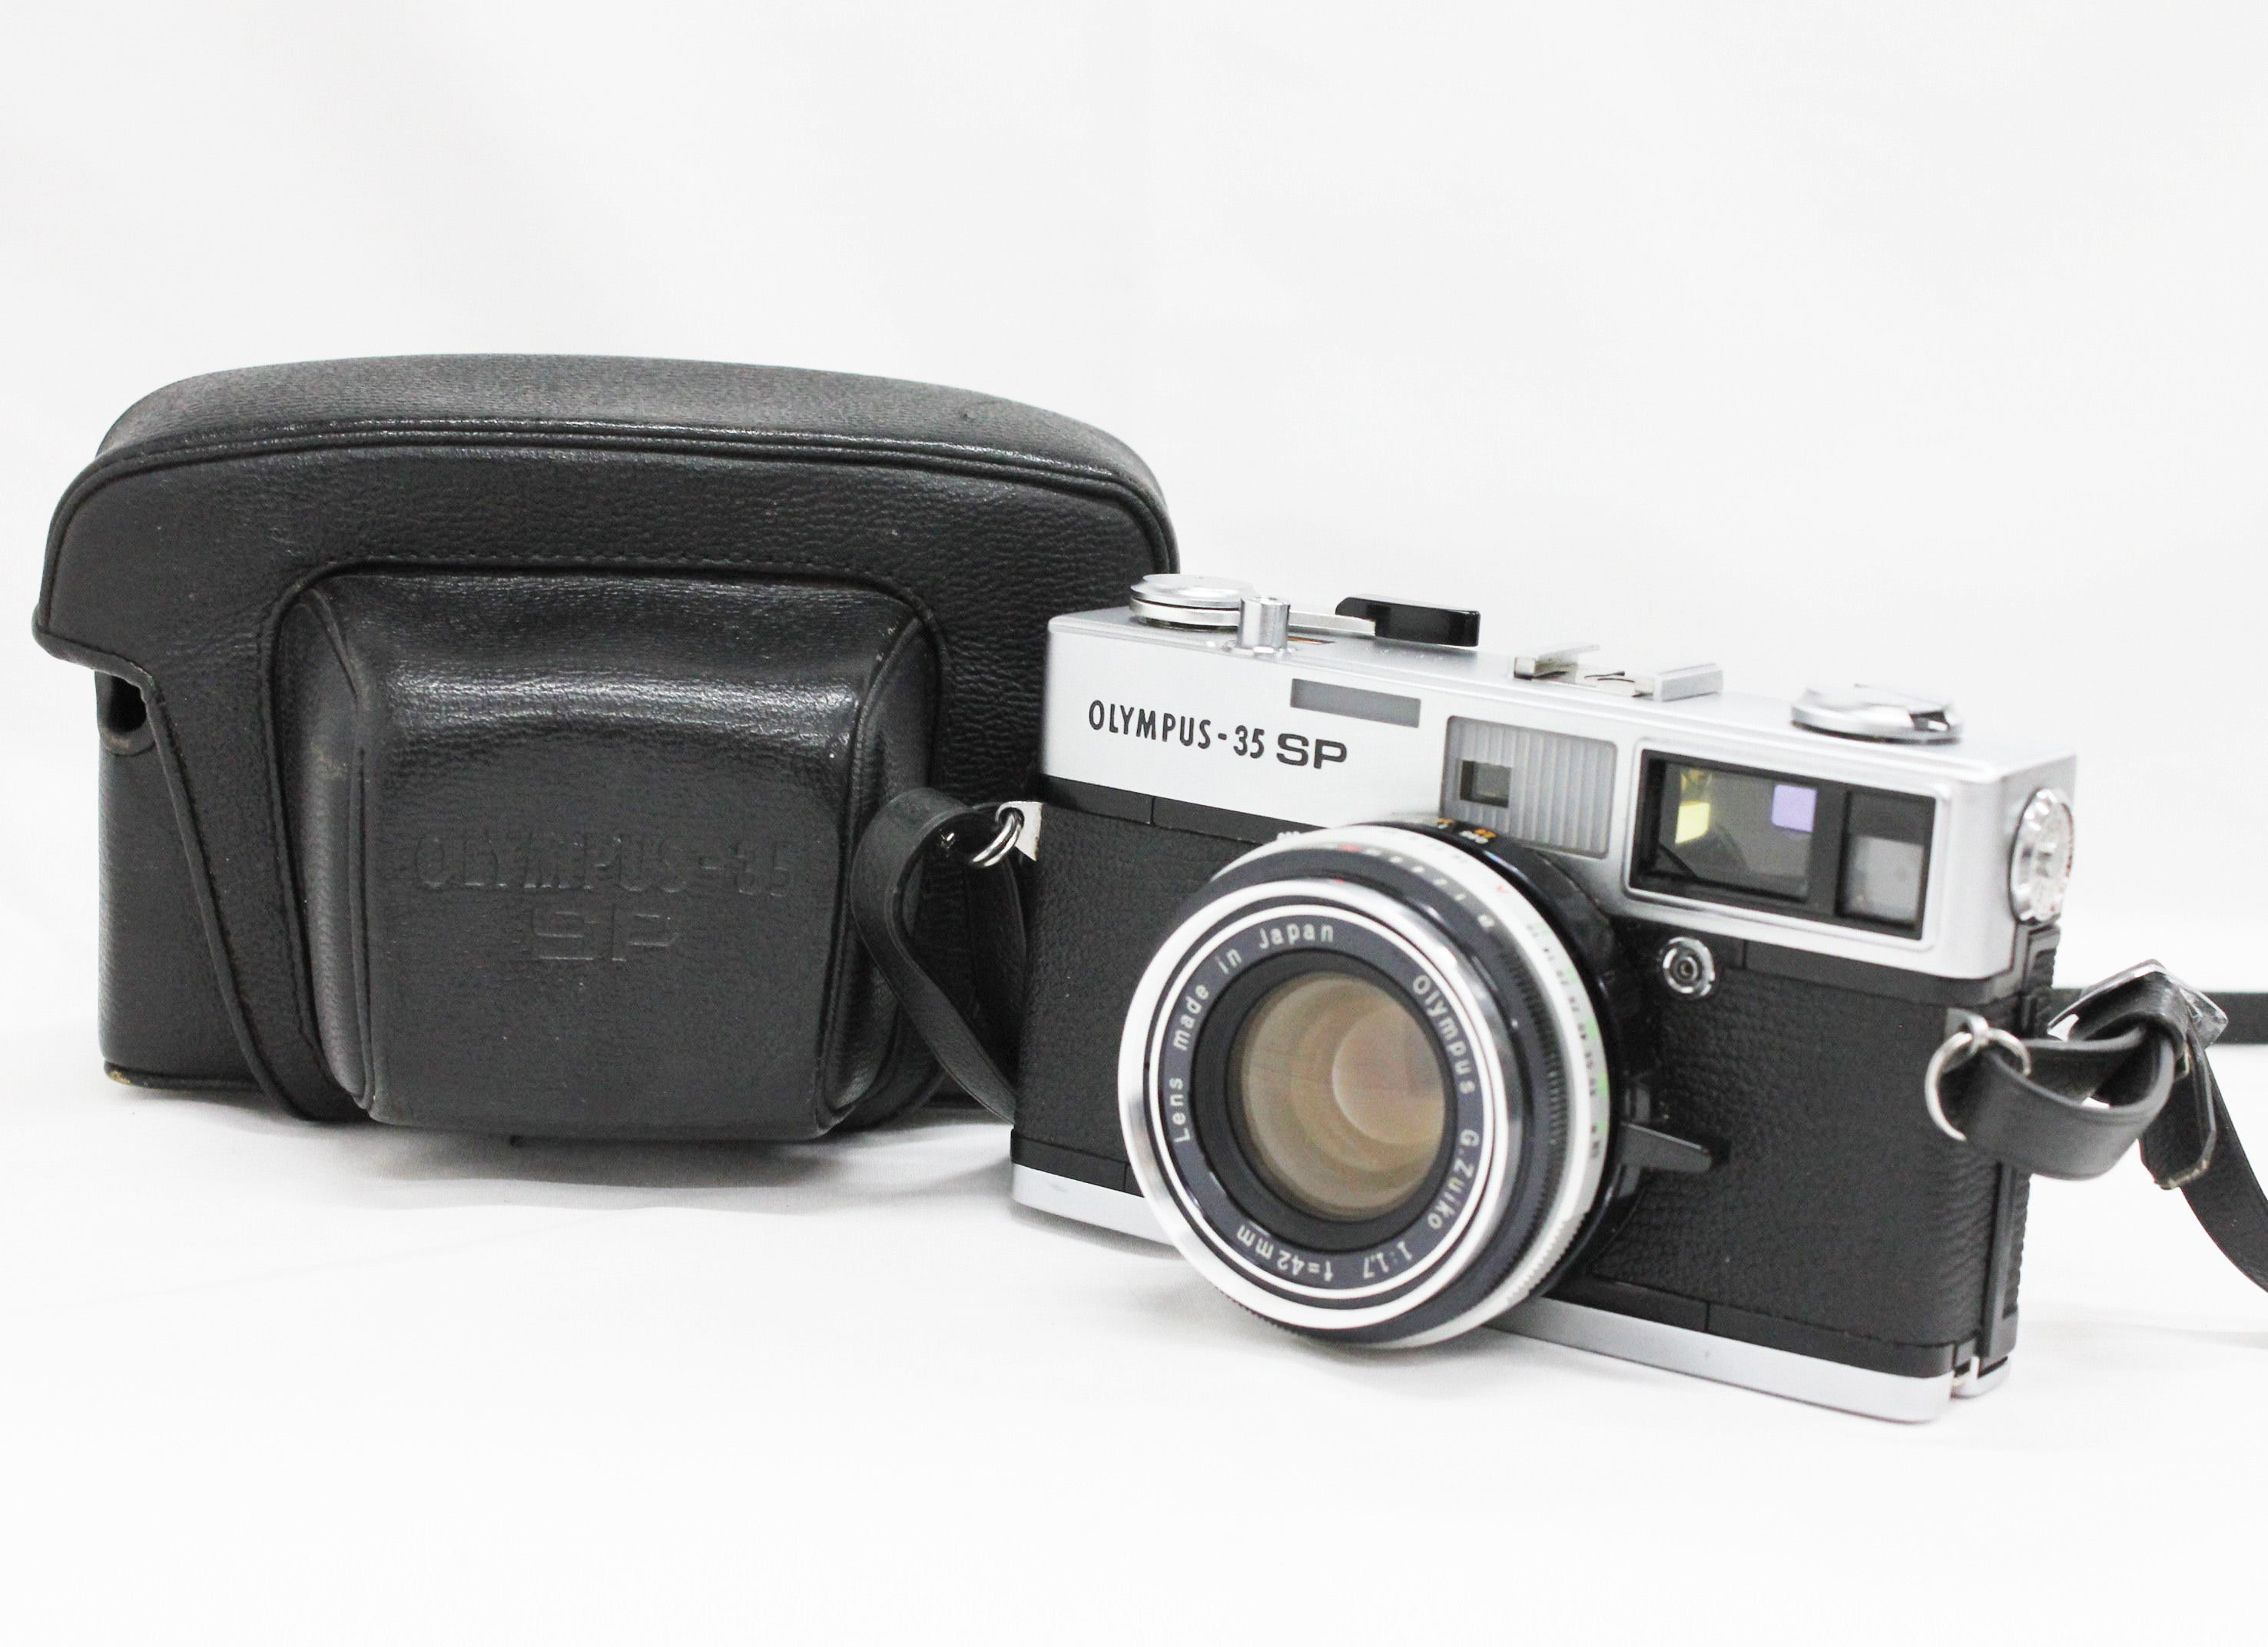  Olympus 35 SP 35mm Rangefinder Film Camera with G.Zuiko 42mm F1.7 Lens from Japan Photo 0